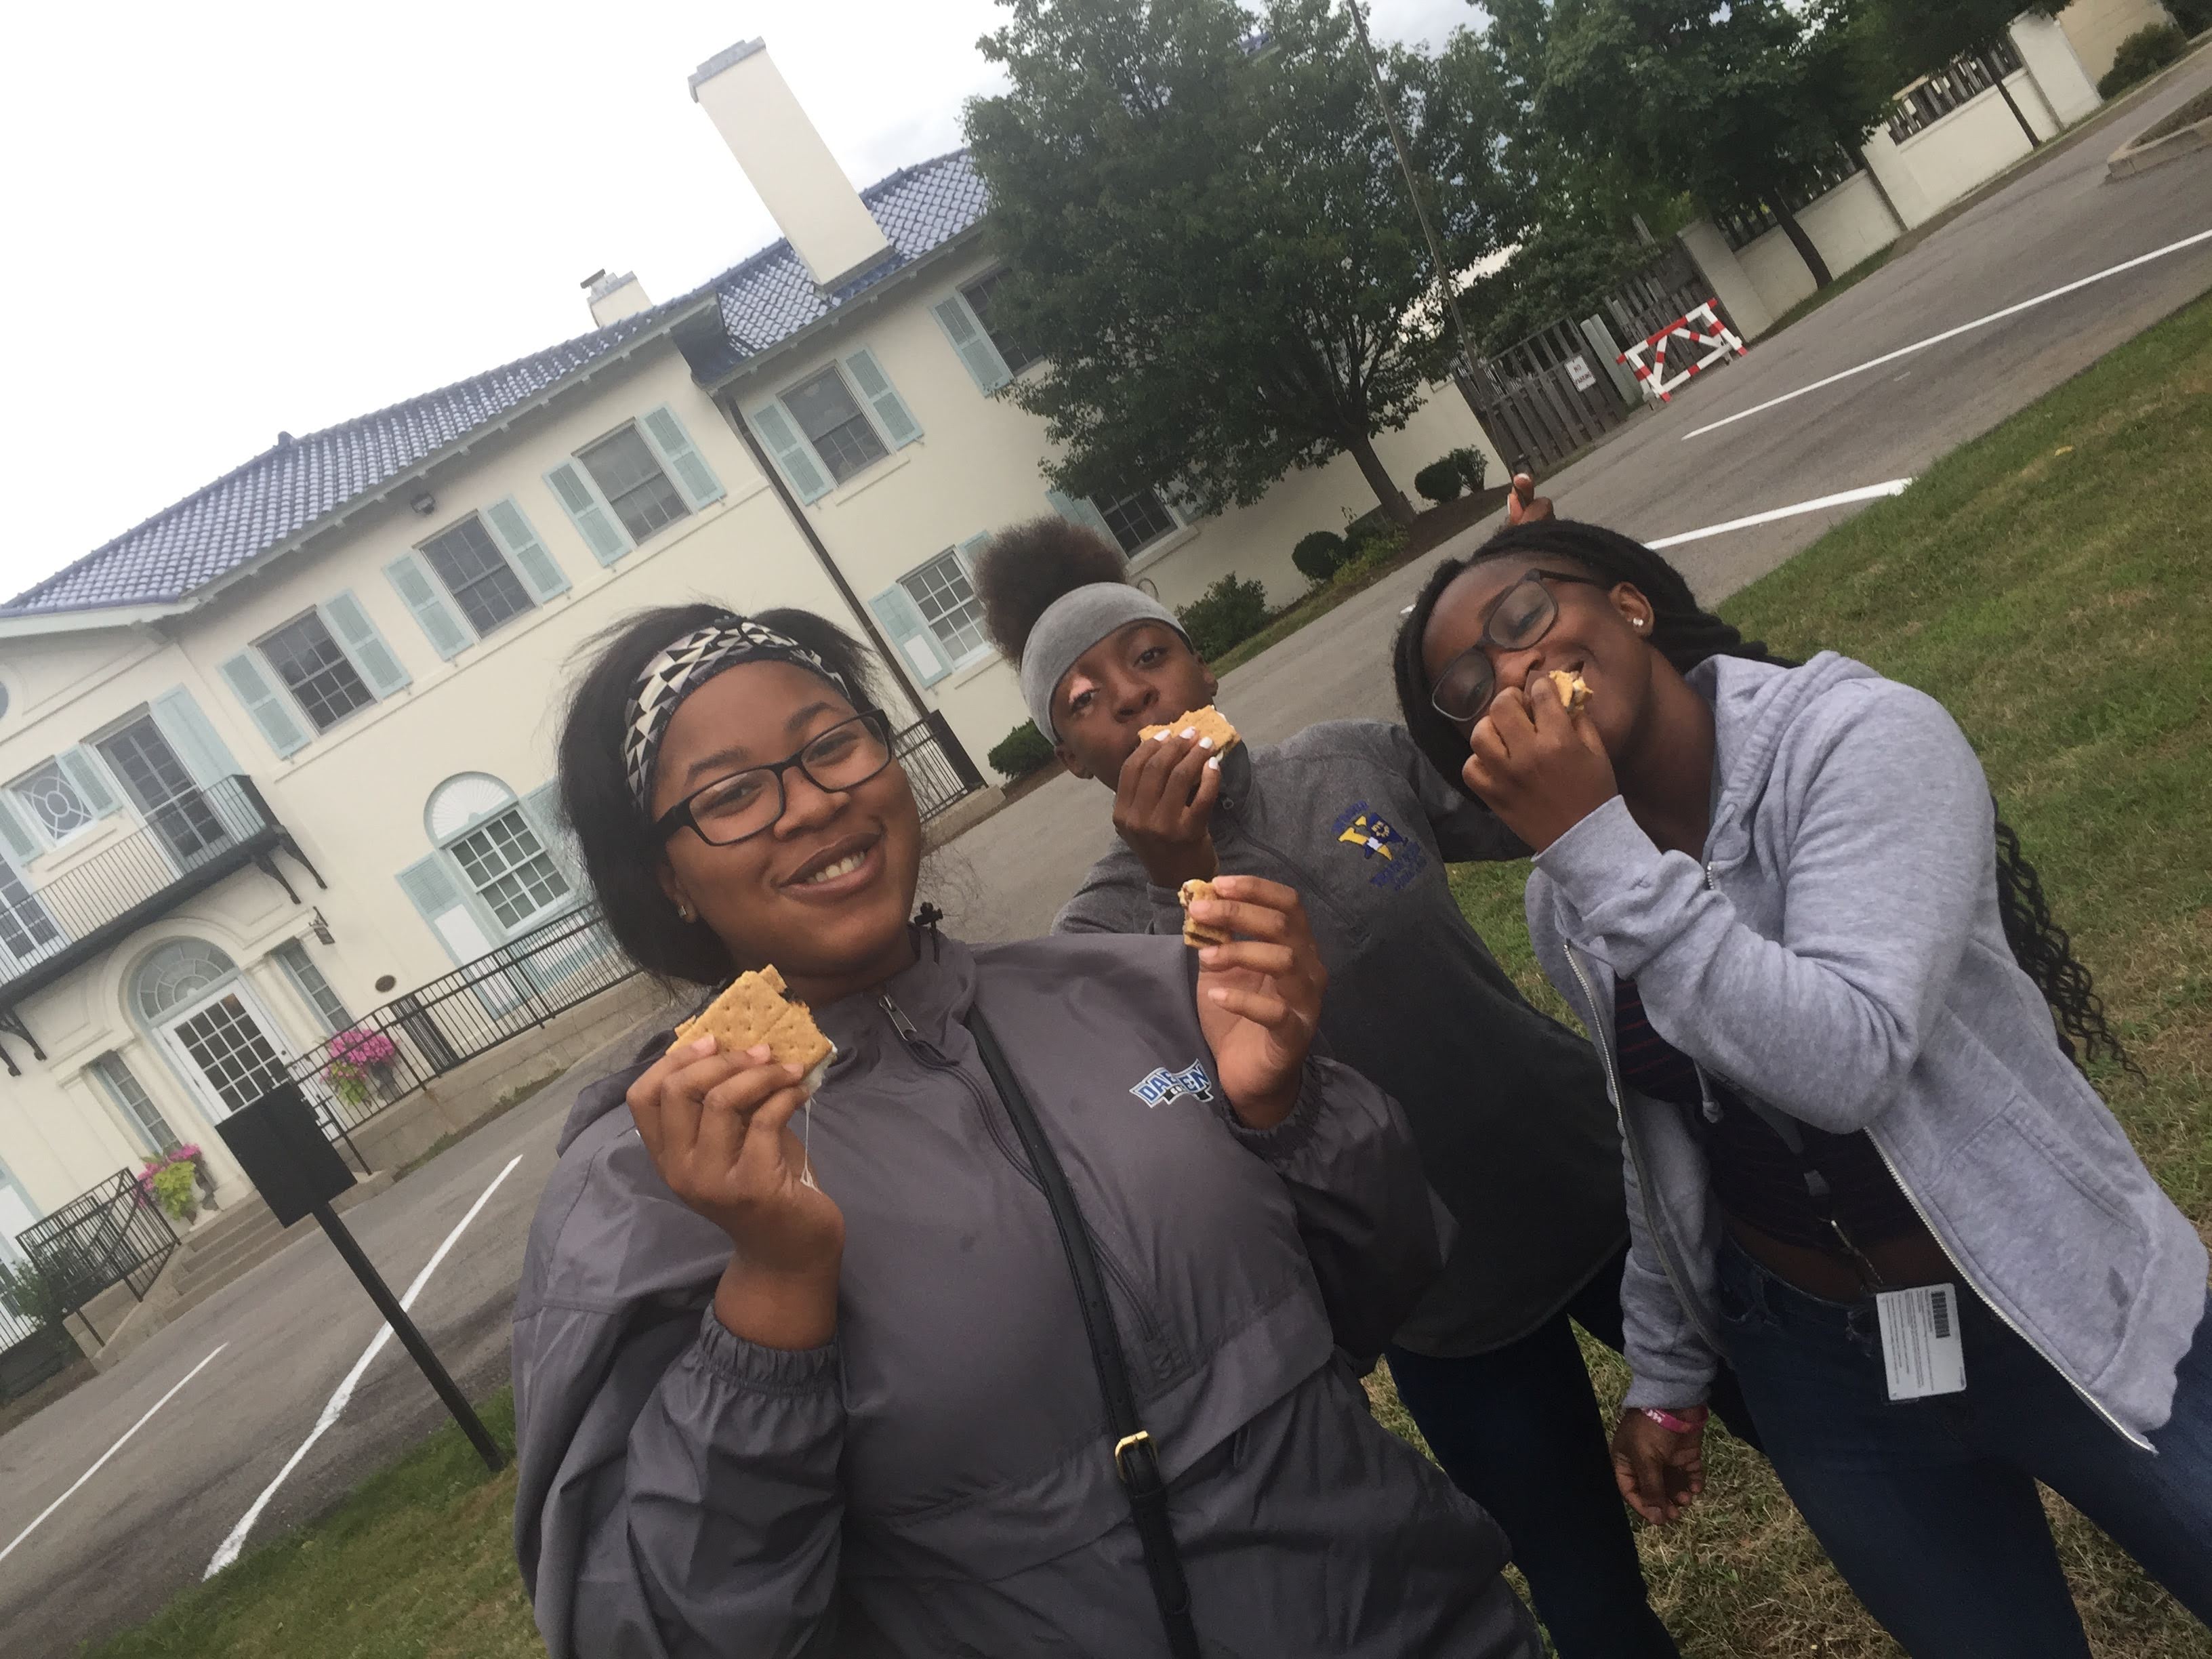 Students enjoy s'mores during campfire binding experience